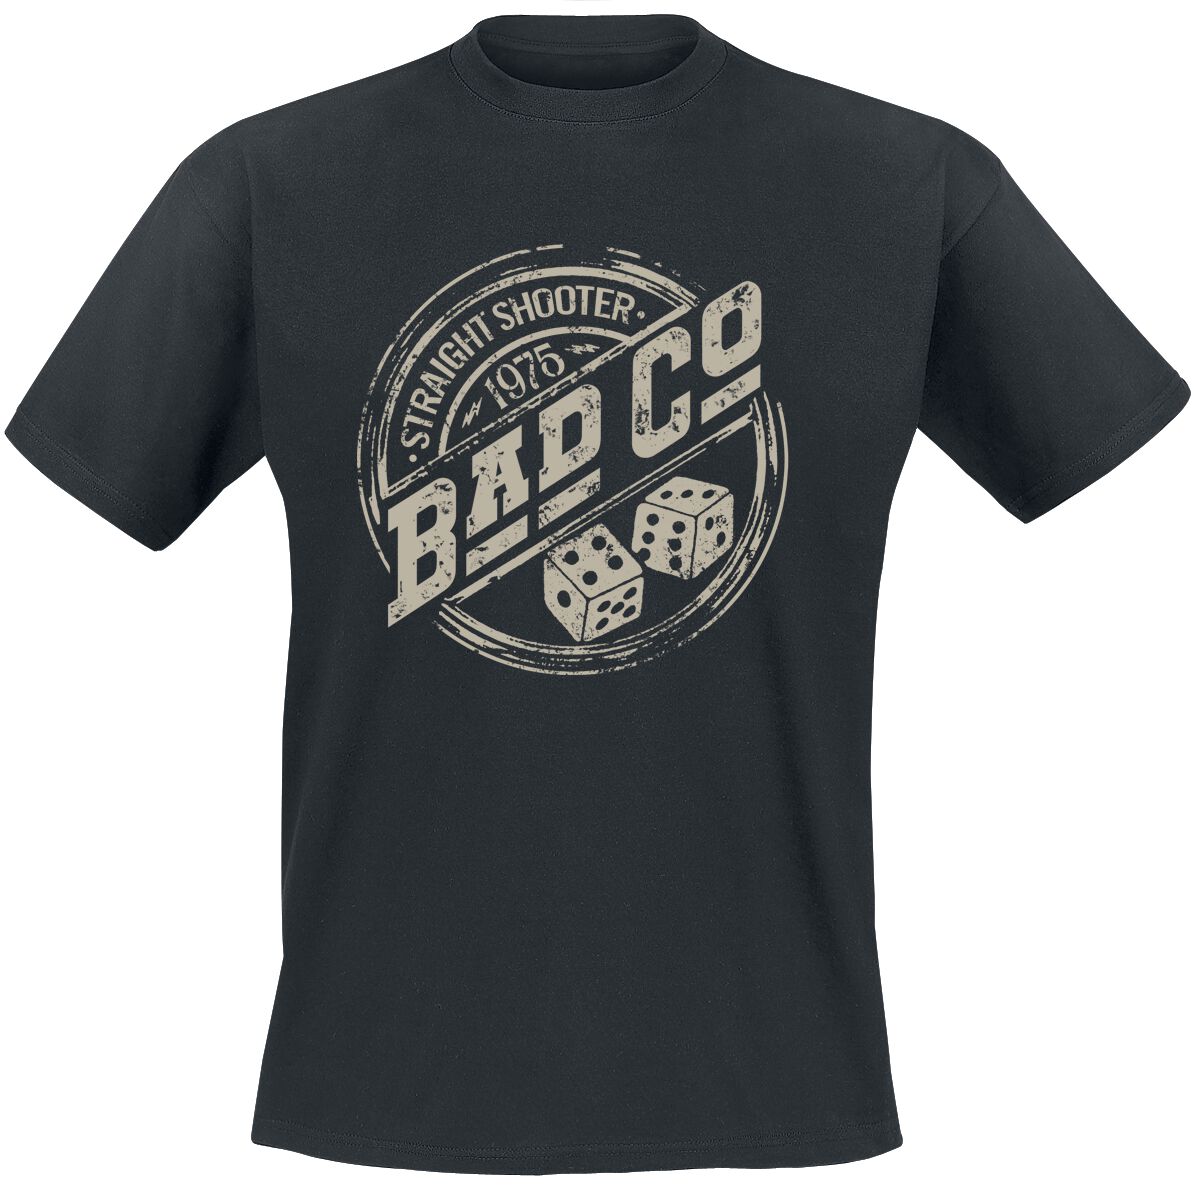 Bad Company Straight Shooter T-Shirt schwarz in L